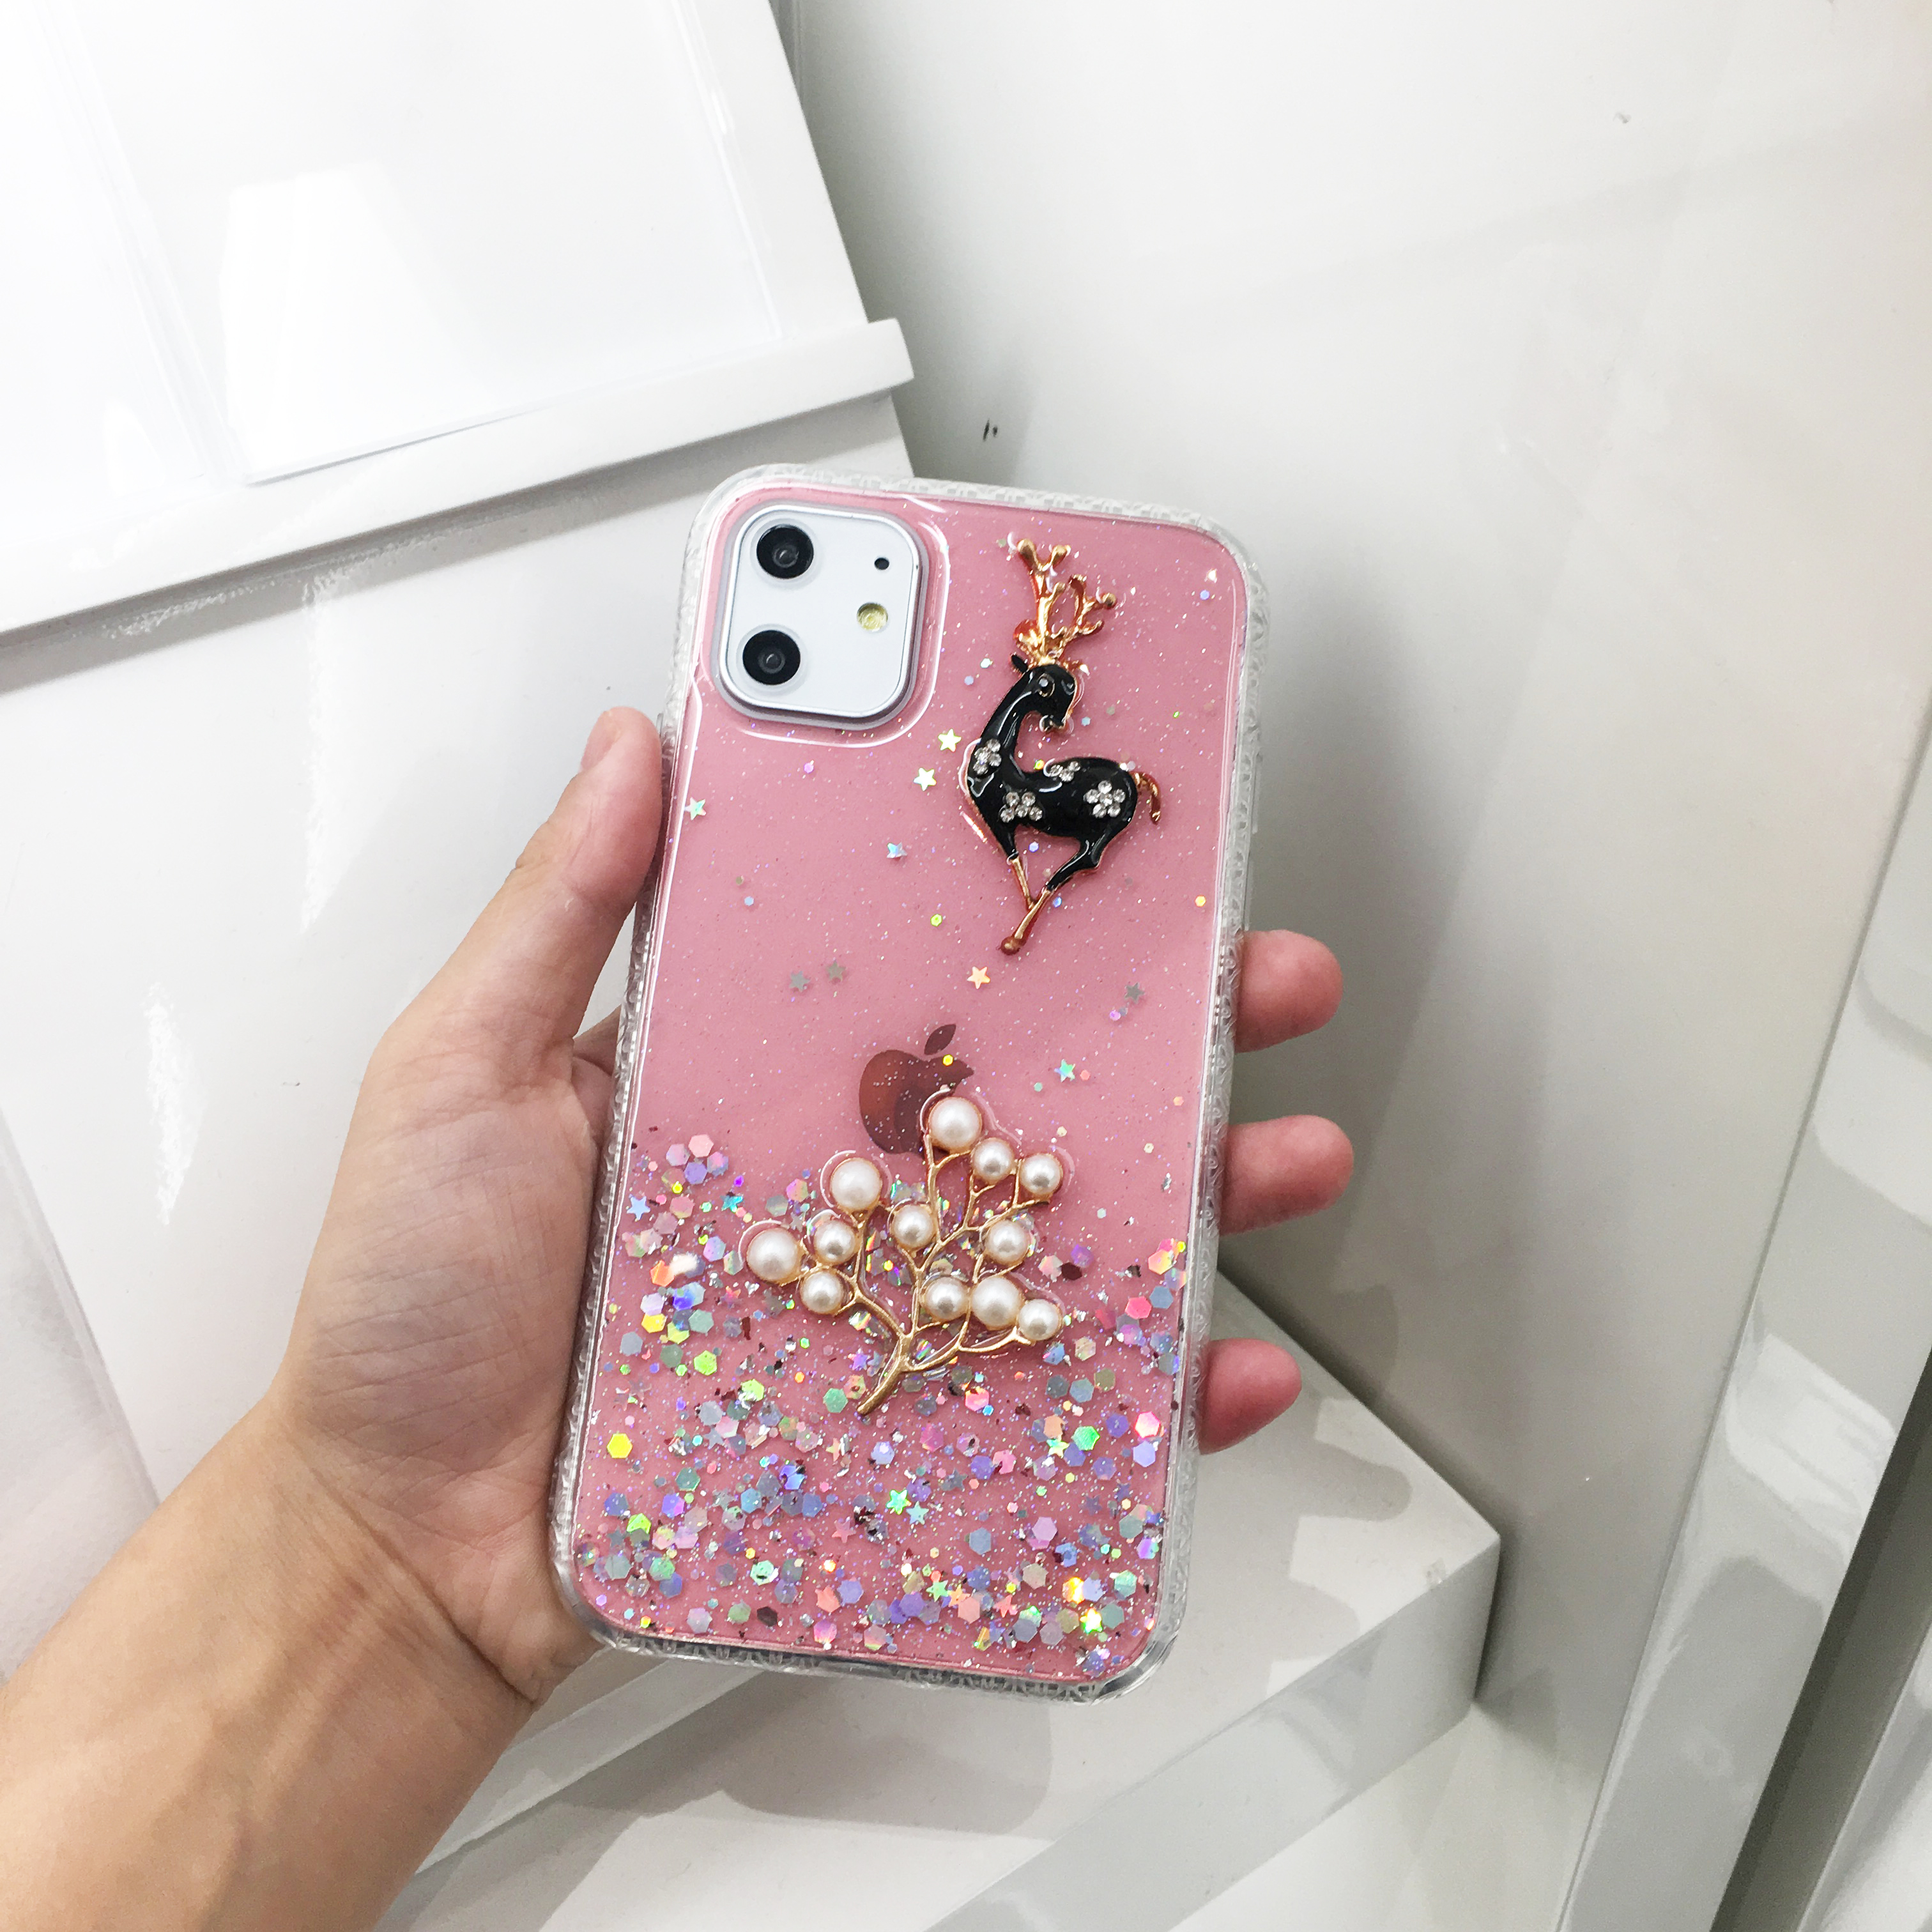 iPHONE 11 (6.1in) 3D Deer Crystal Diamond Shiny Case (Pink)